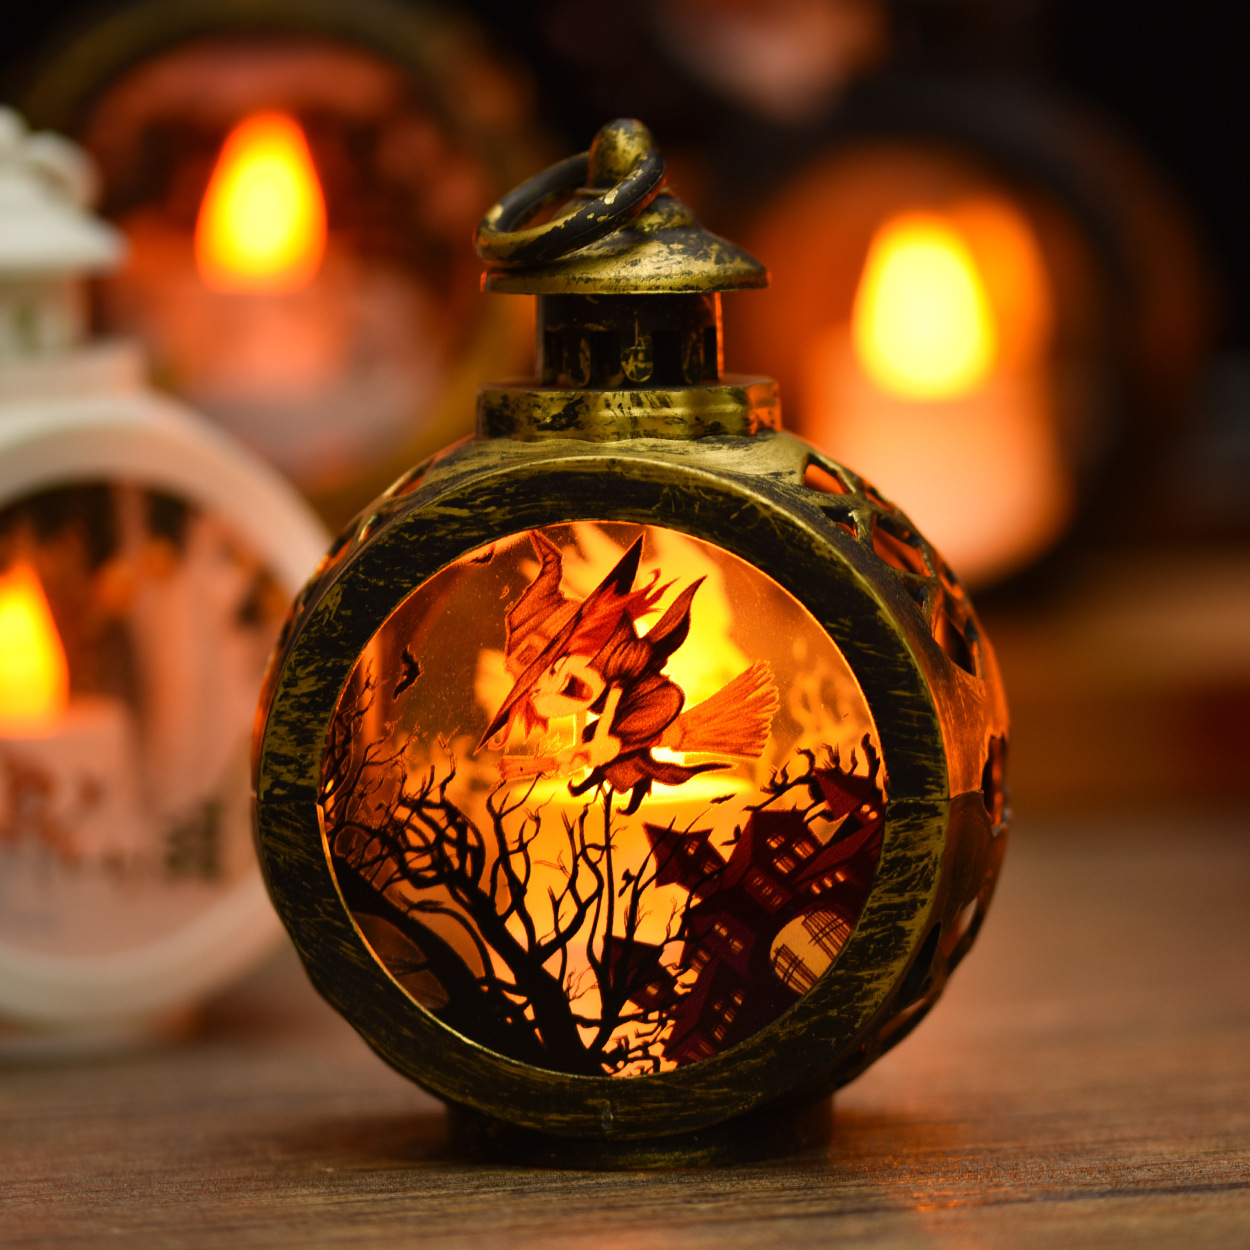 Retro Round Small Wind Light Exclusive for Cross-Border LED Electronic Candle Light Christmas Halloween Party Decoration Ornaments